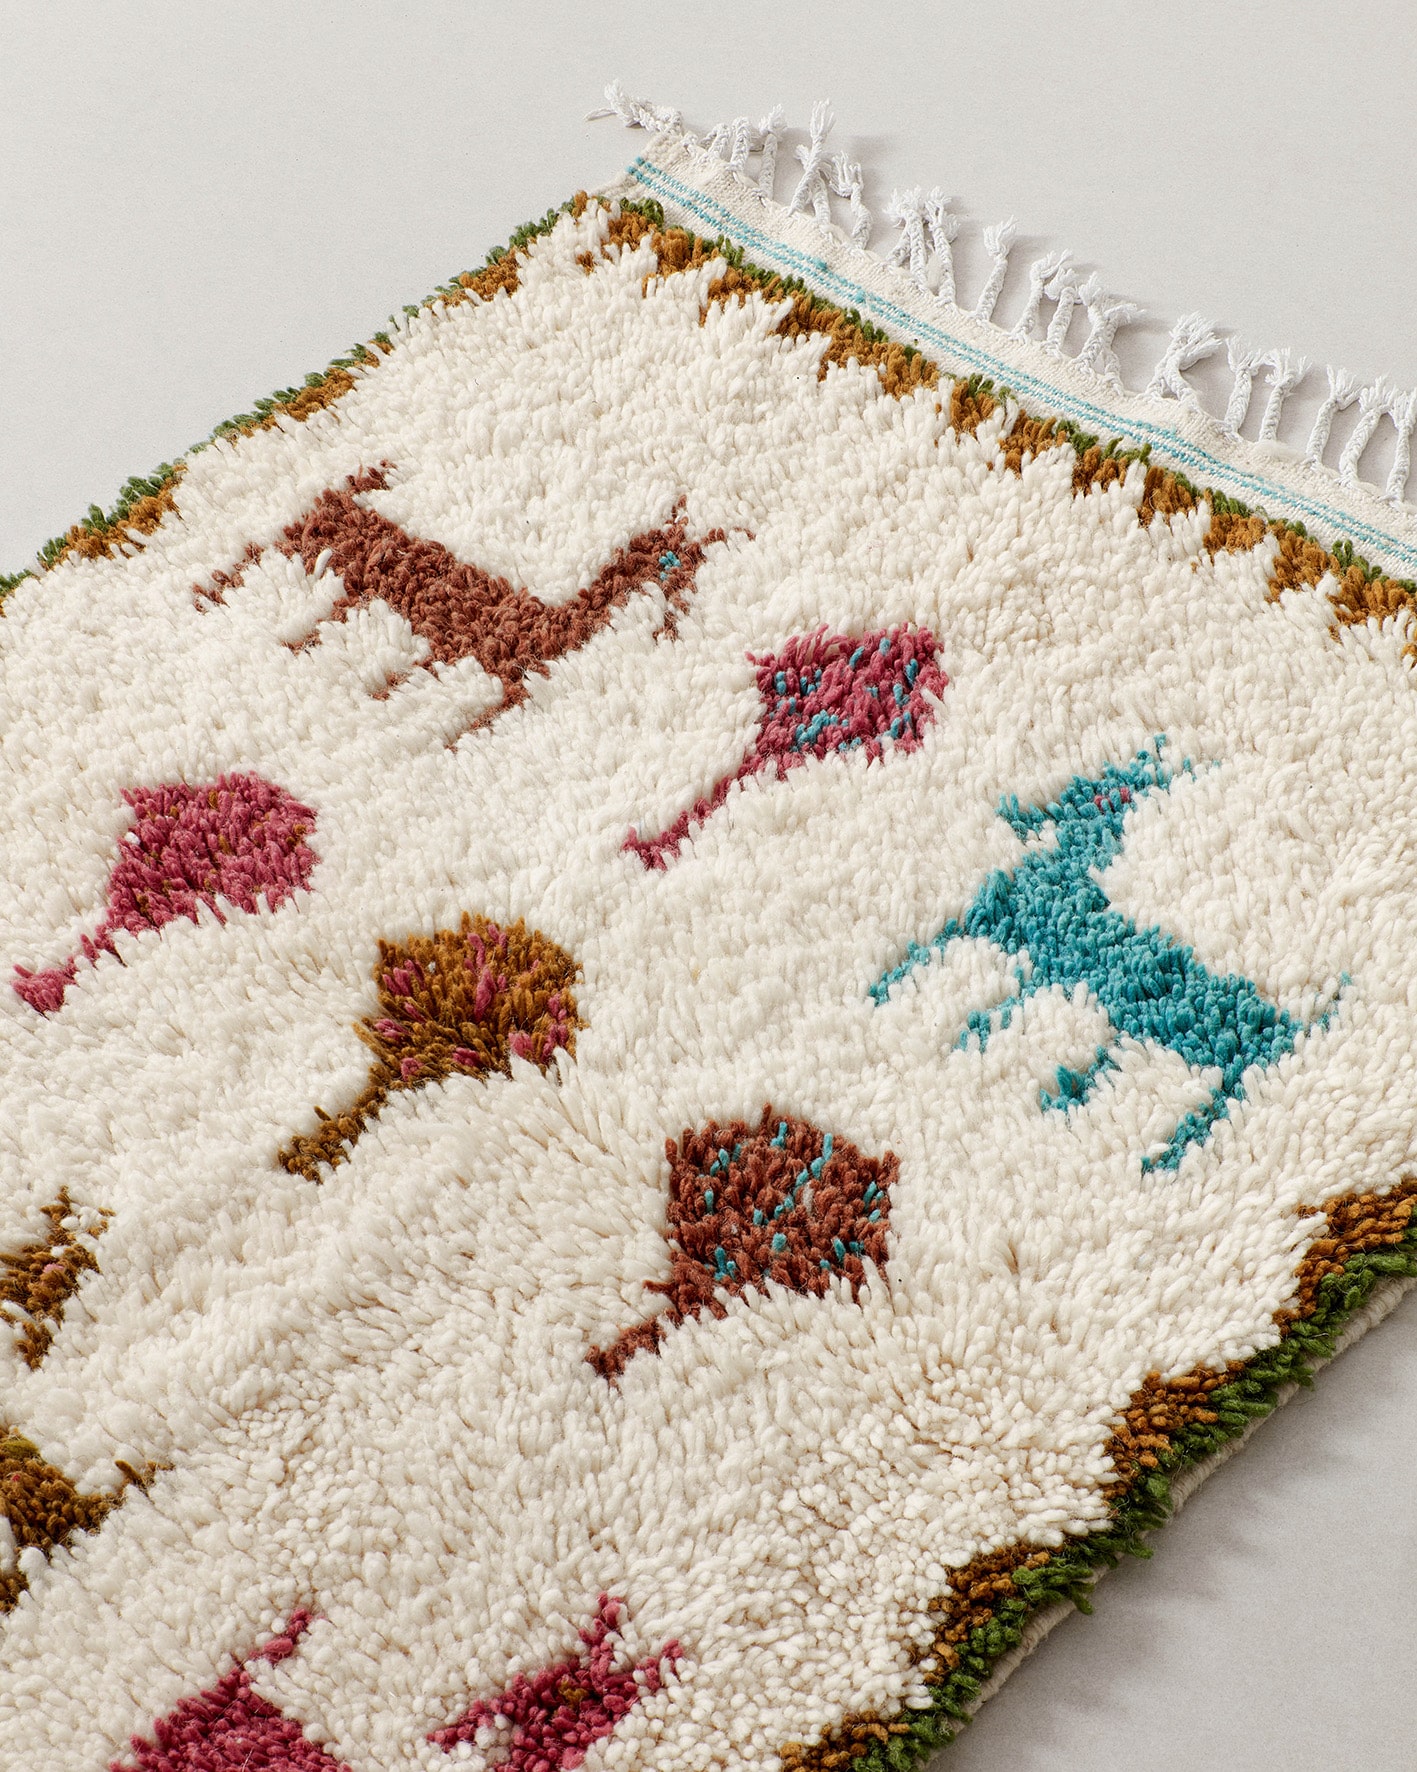 Tiny rug featuring animals in a rust and teal colour palette, close